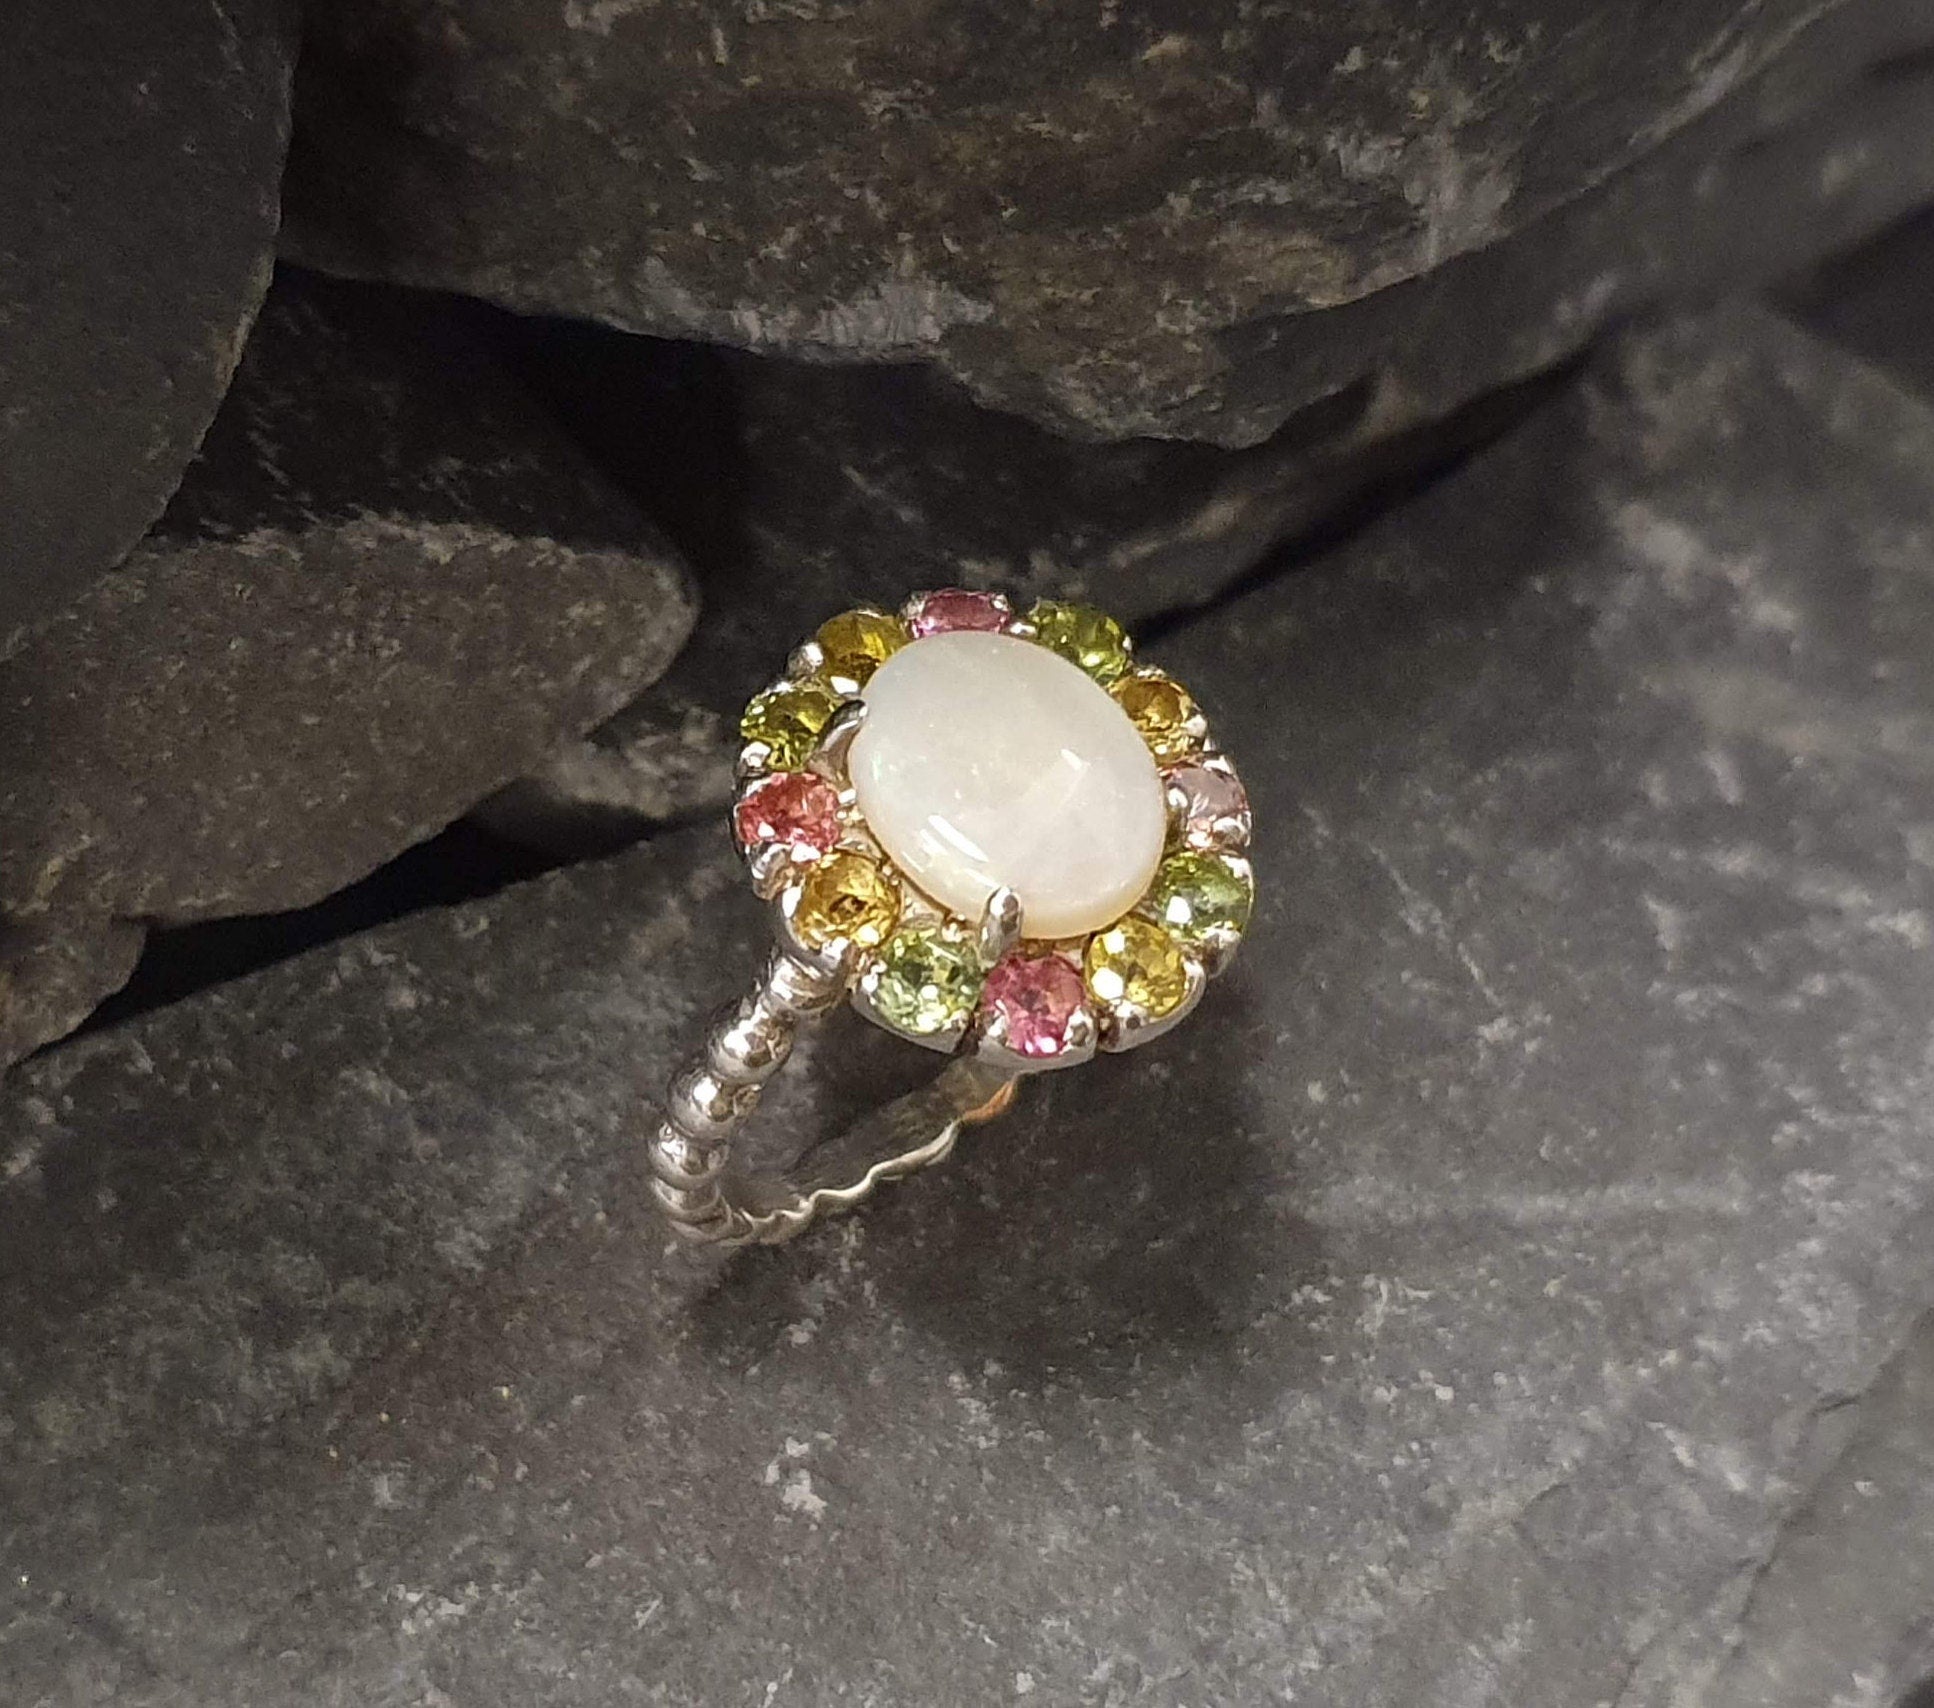 Precious Opal Ring, Natural Opal, Victorian Ring, October Birthstone Ring, White Oval Ring, Tourmaline Ring, Vintage Ring, Solid Silver Ring